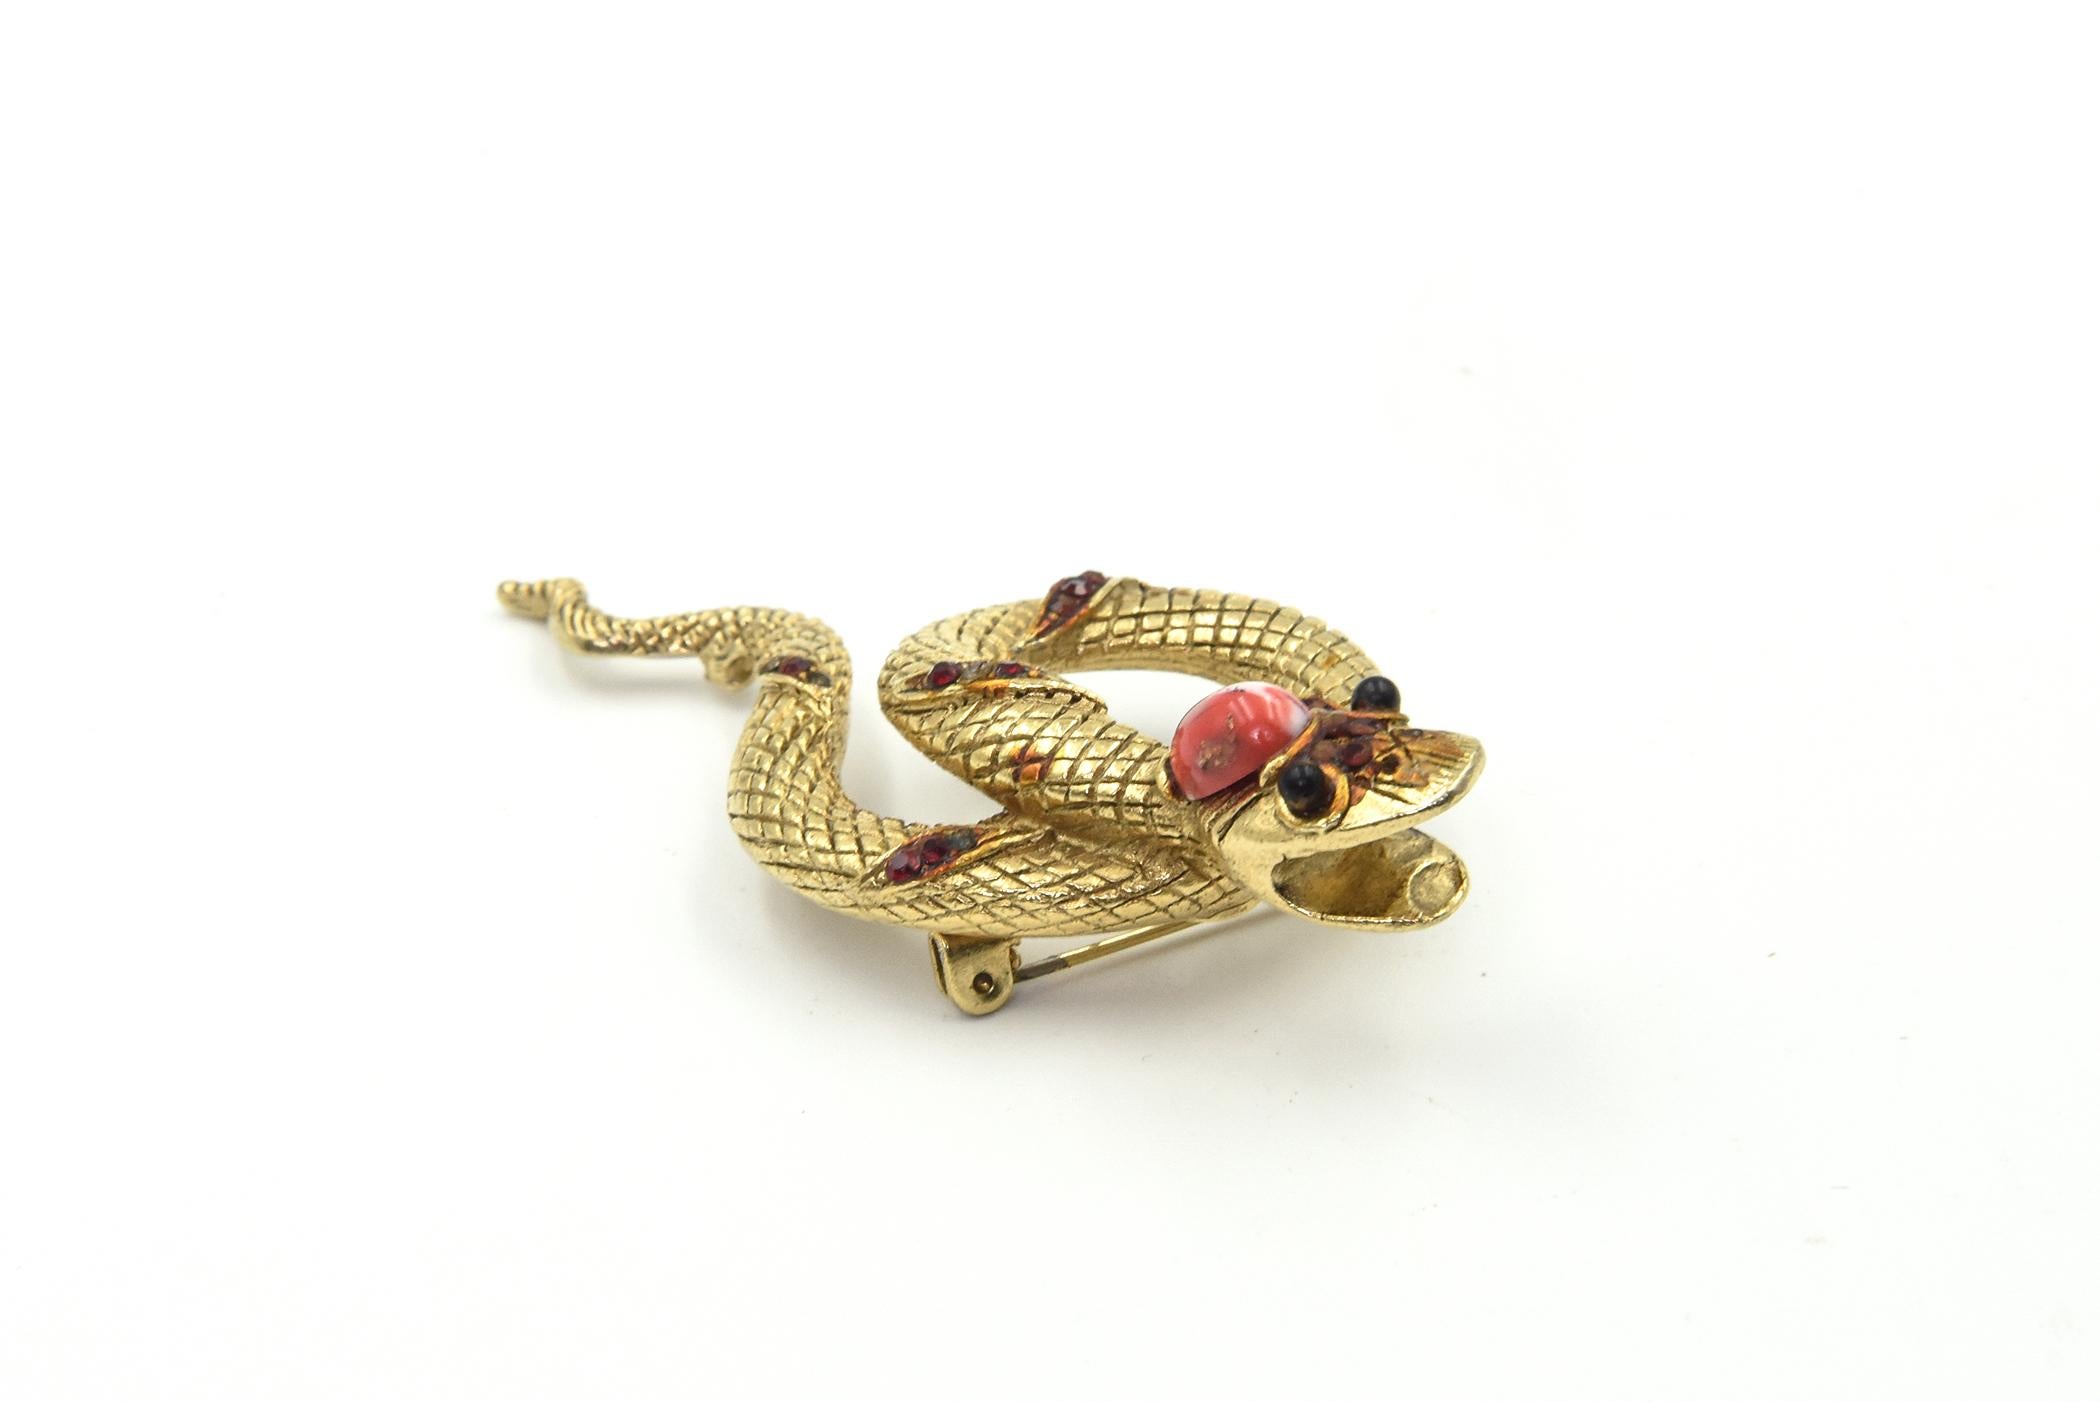 Amusing Large Gold Toned Snake Brooch In Fair Condition For Sale In Miami Beach, FL